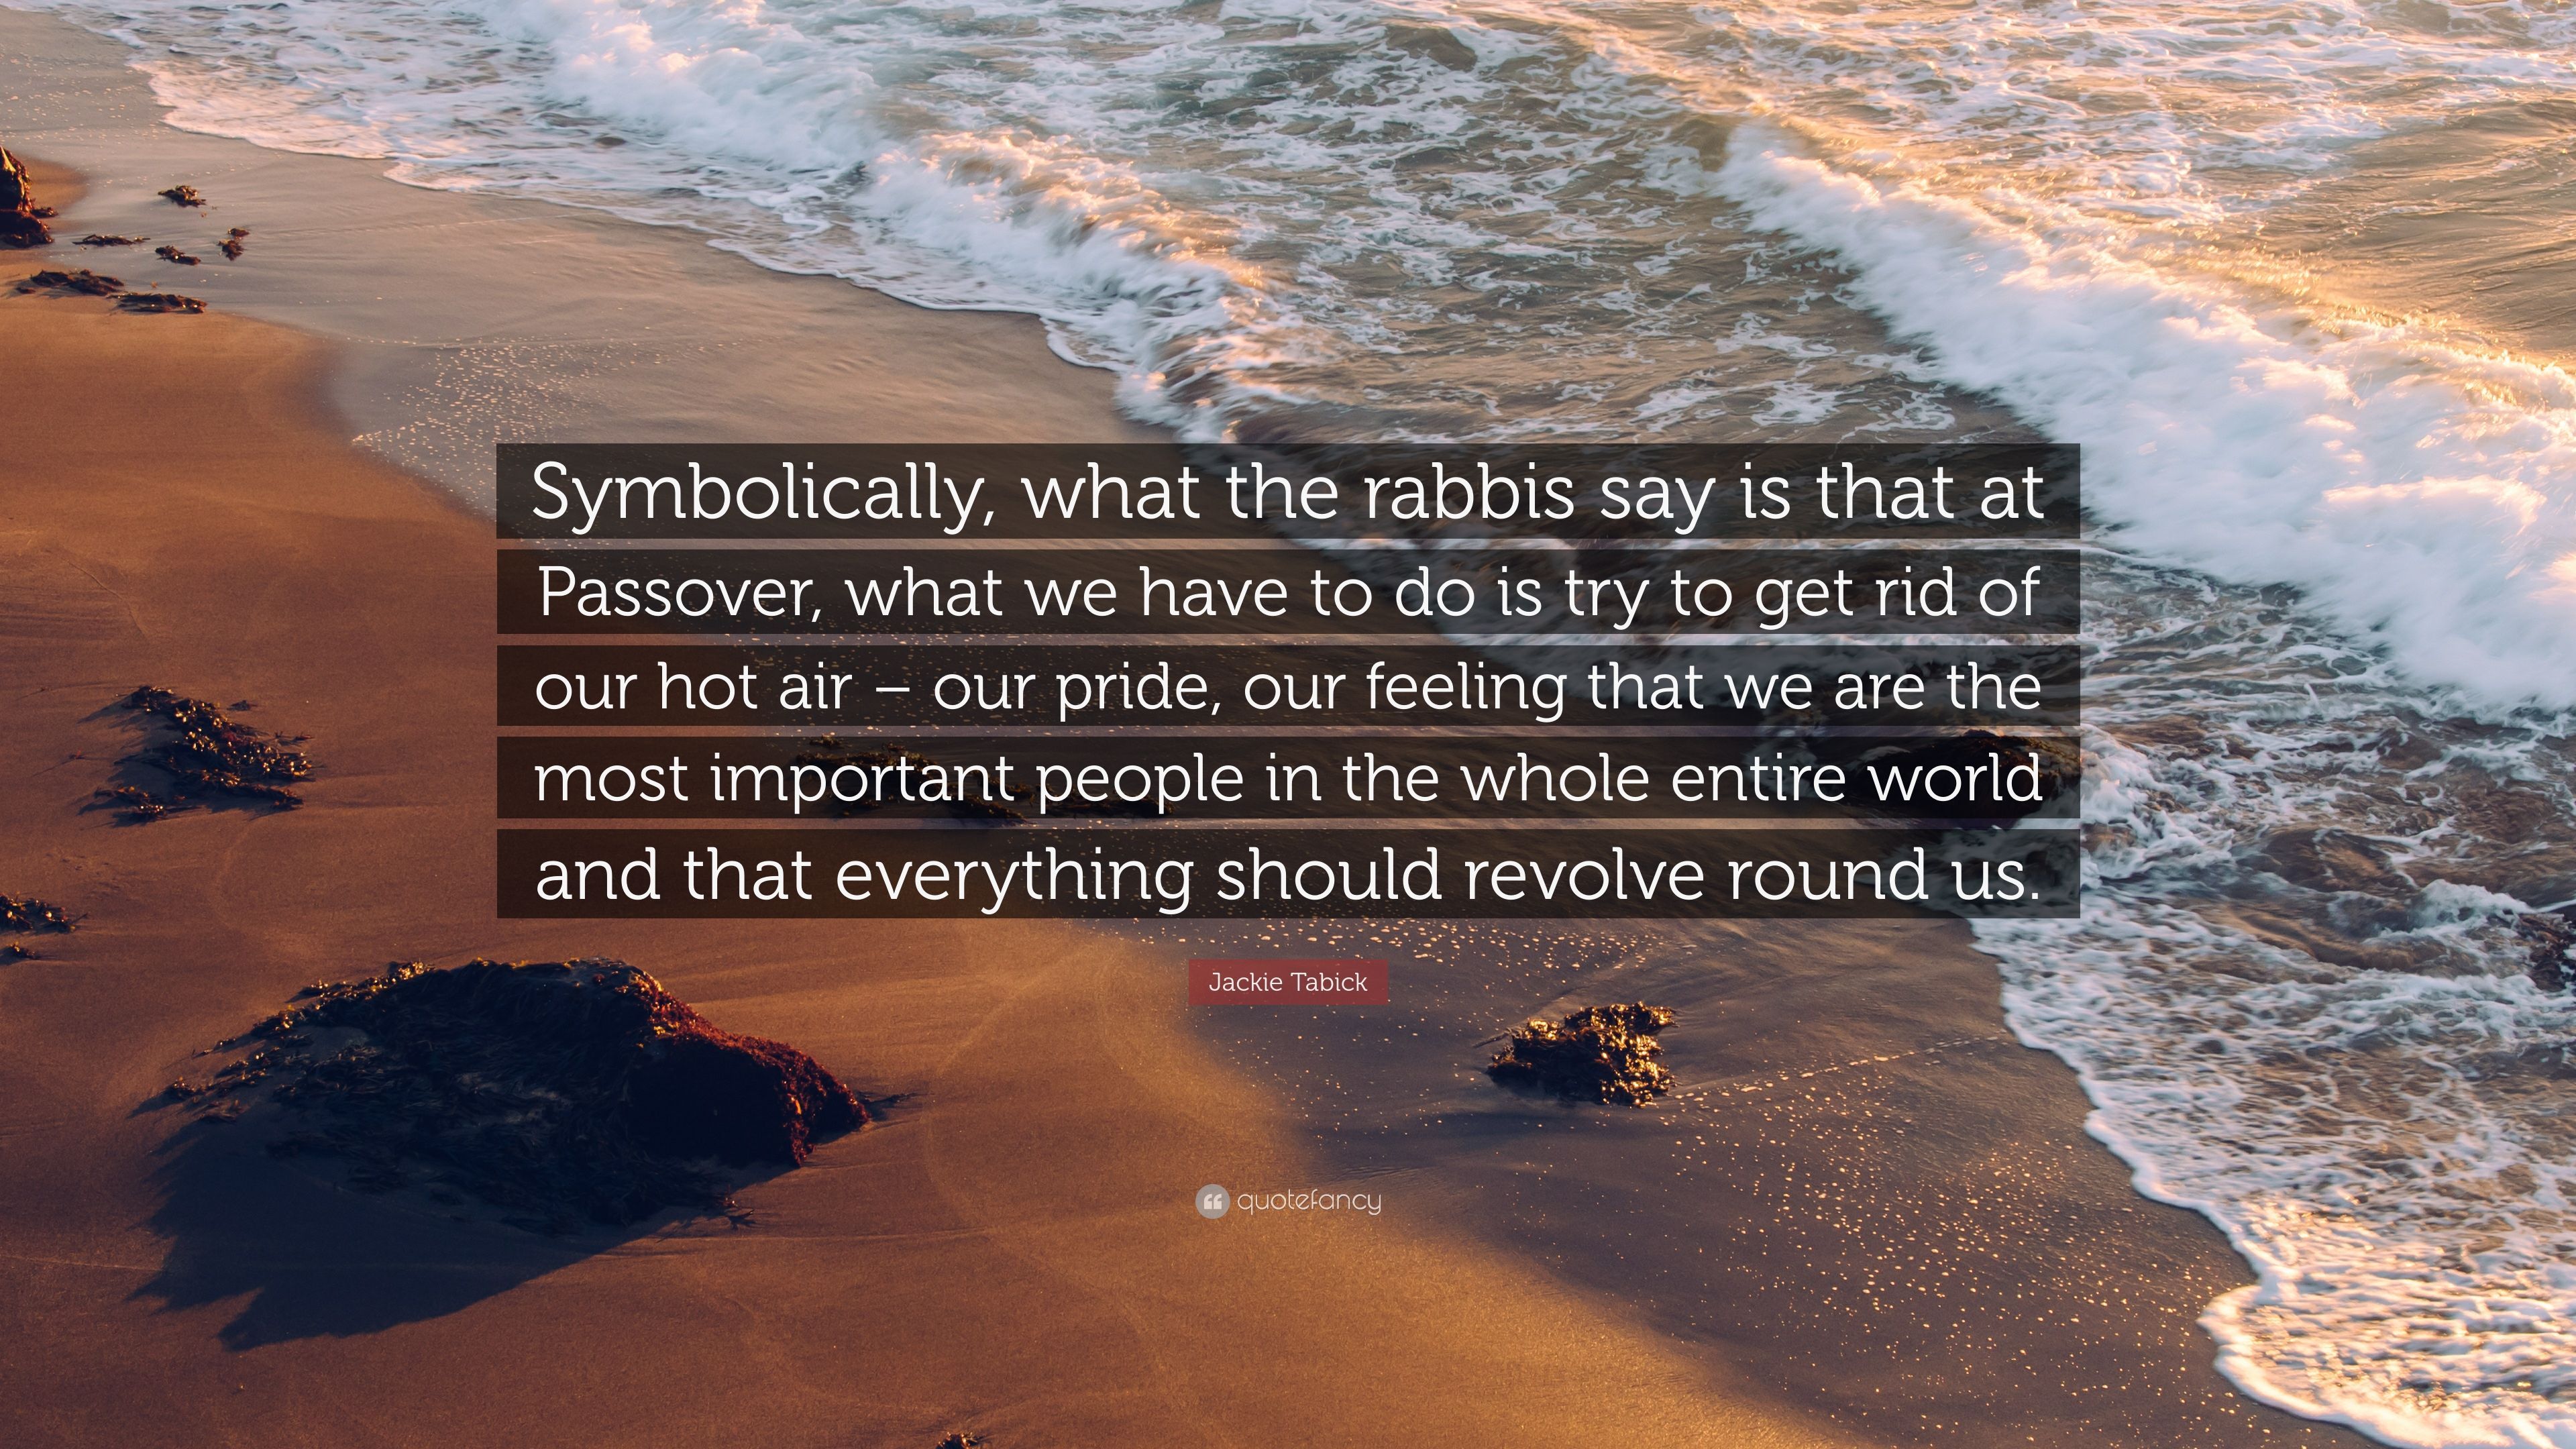 Jackie Tabick Quote: “Symbolically, what the rabbis say is that at